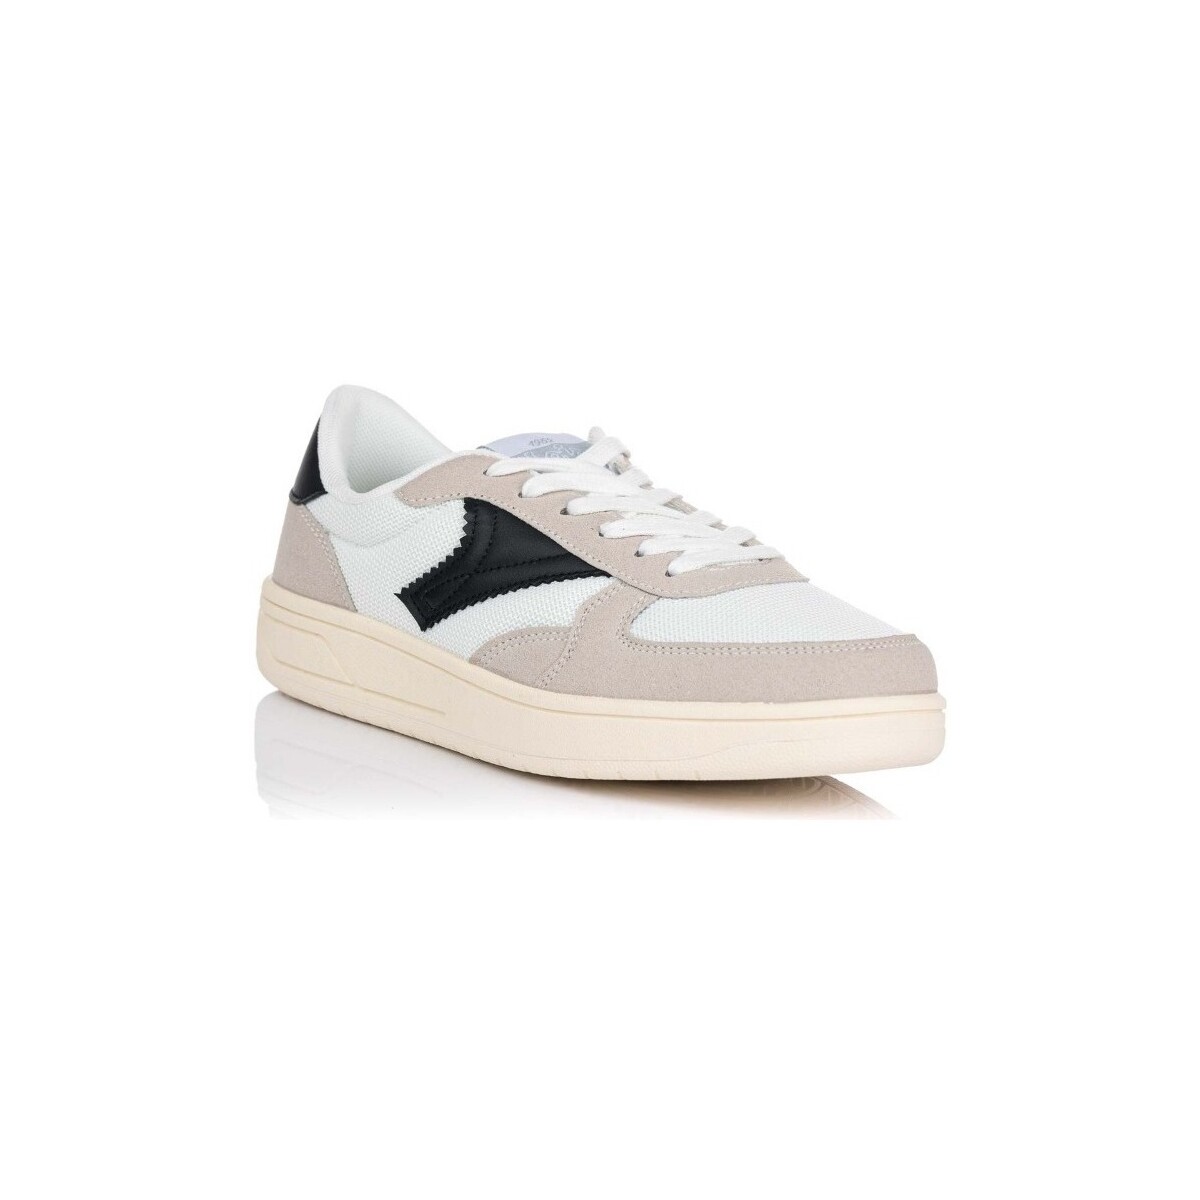 Chaussures Homme Baskets basses Lois 64182 Blanc